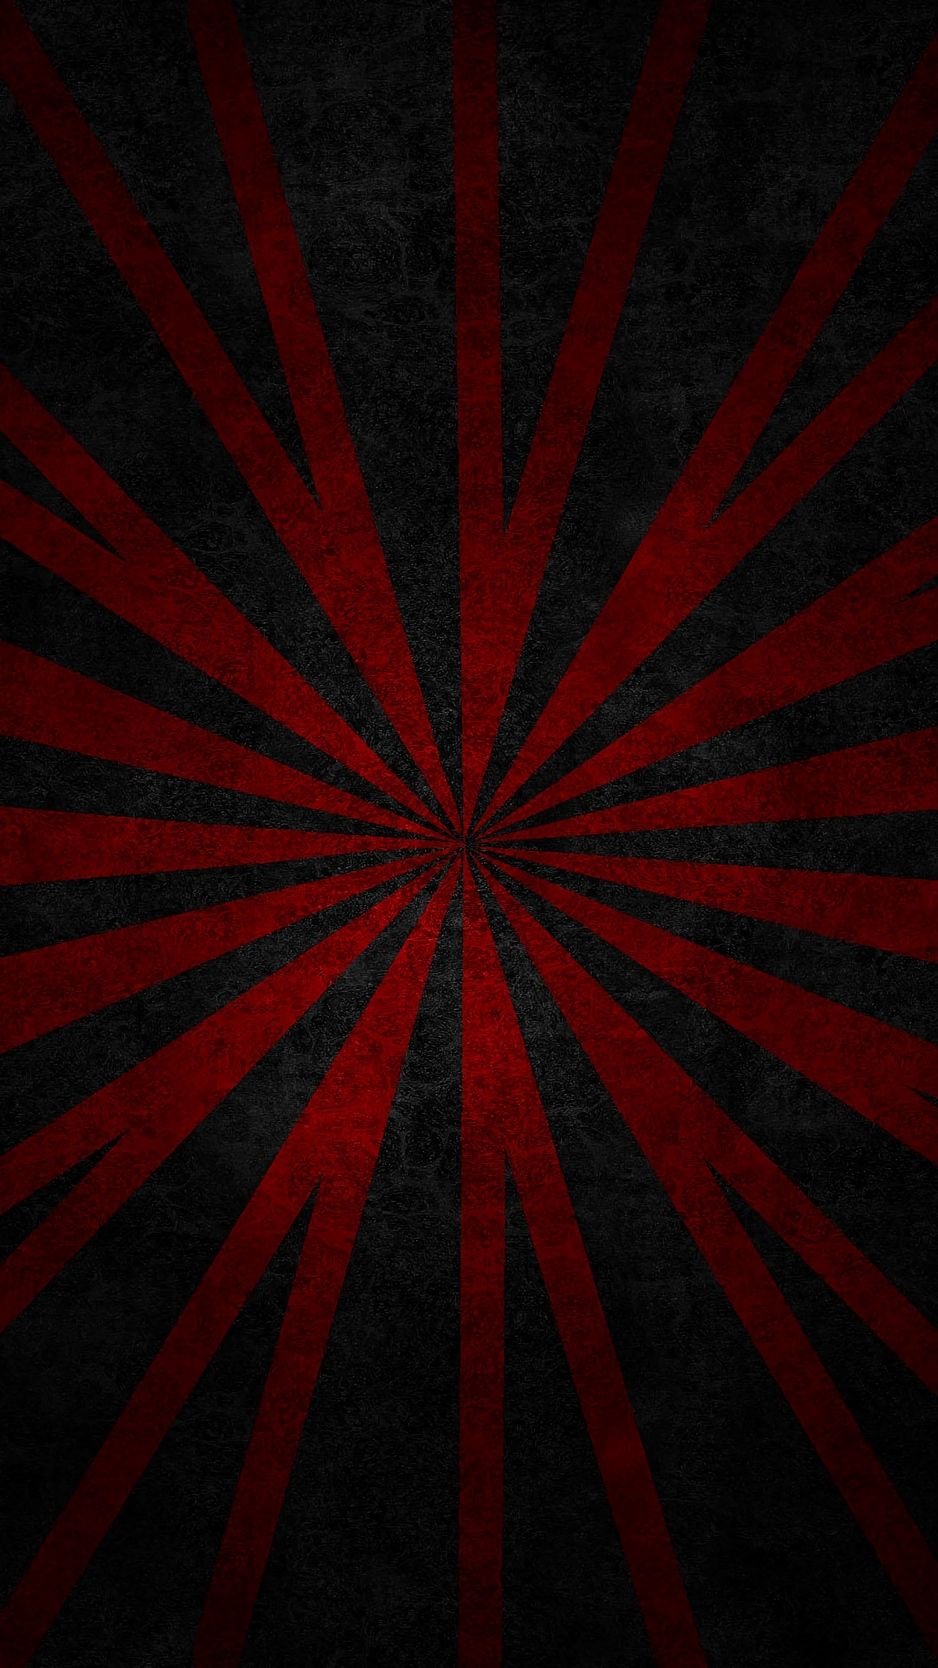 255291 wallpaper lines rotation red black red and black iphone